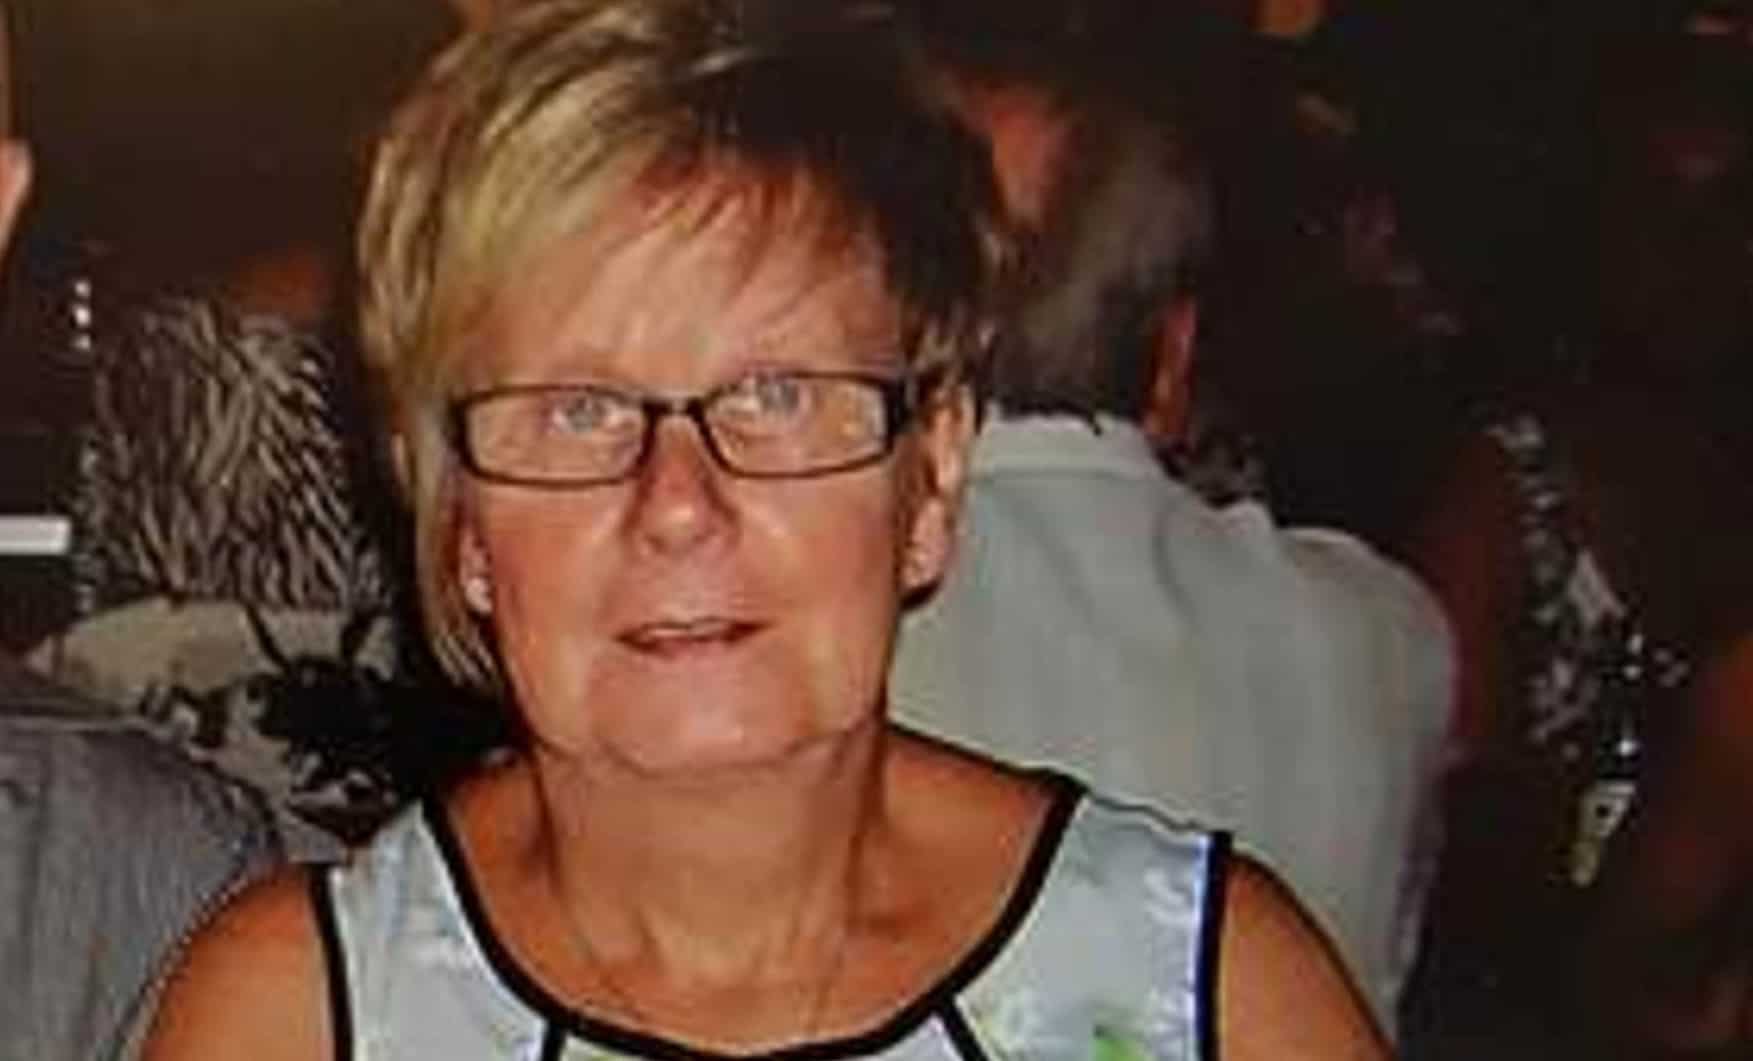 ‘Exasperating’ – Campaigners slam decision not to review lockdown killing of woman by husband